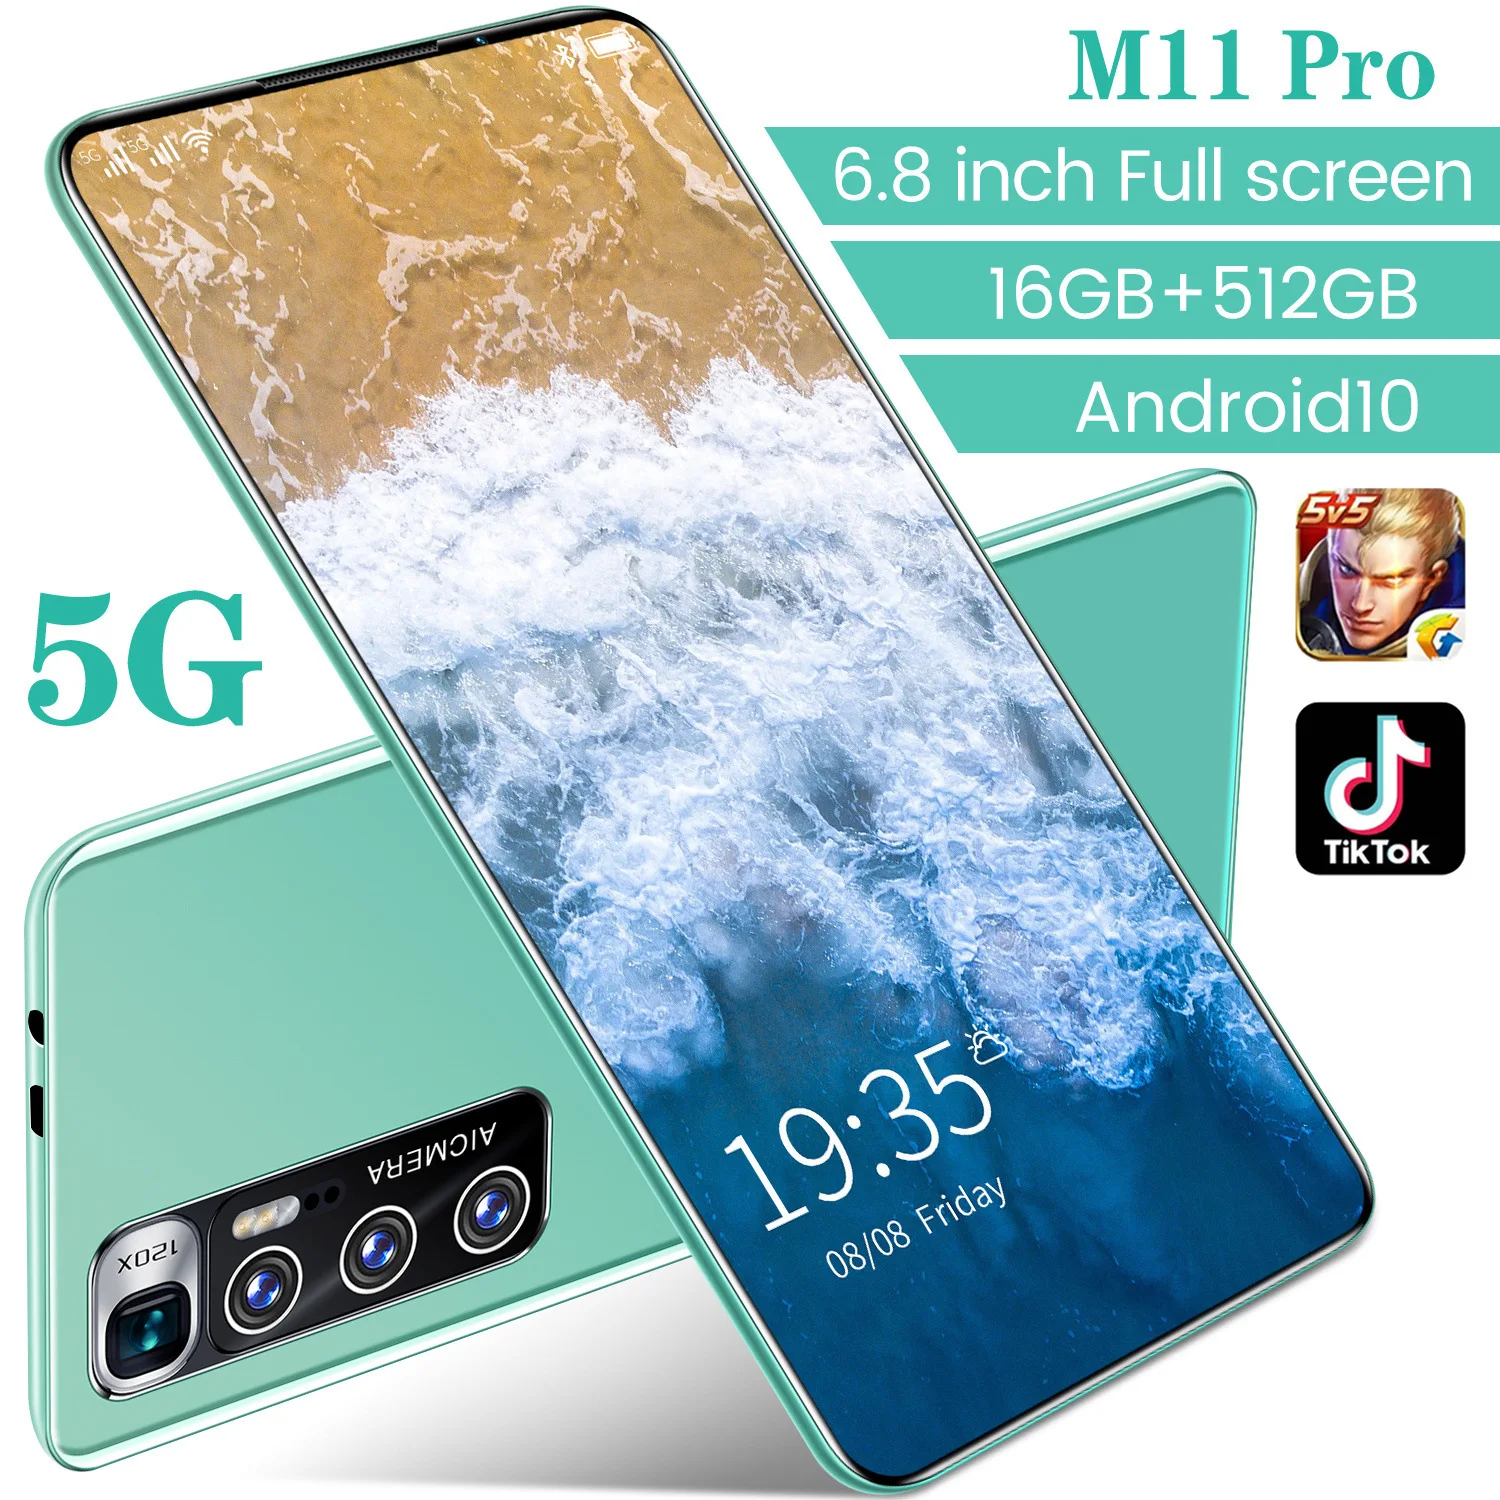 

2022 New Unlocked Smartphone M11 Pro With Dual SIM Card Face ID Original Unlock Android 10.0 16GB+512GB Celulares, As pic show